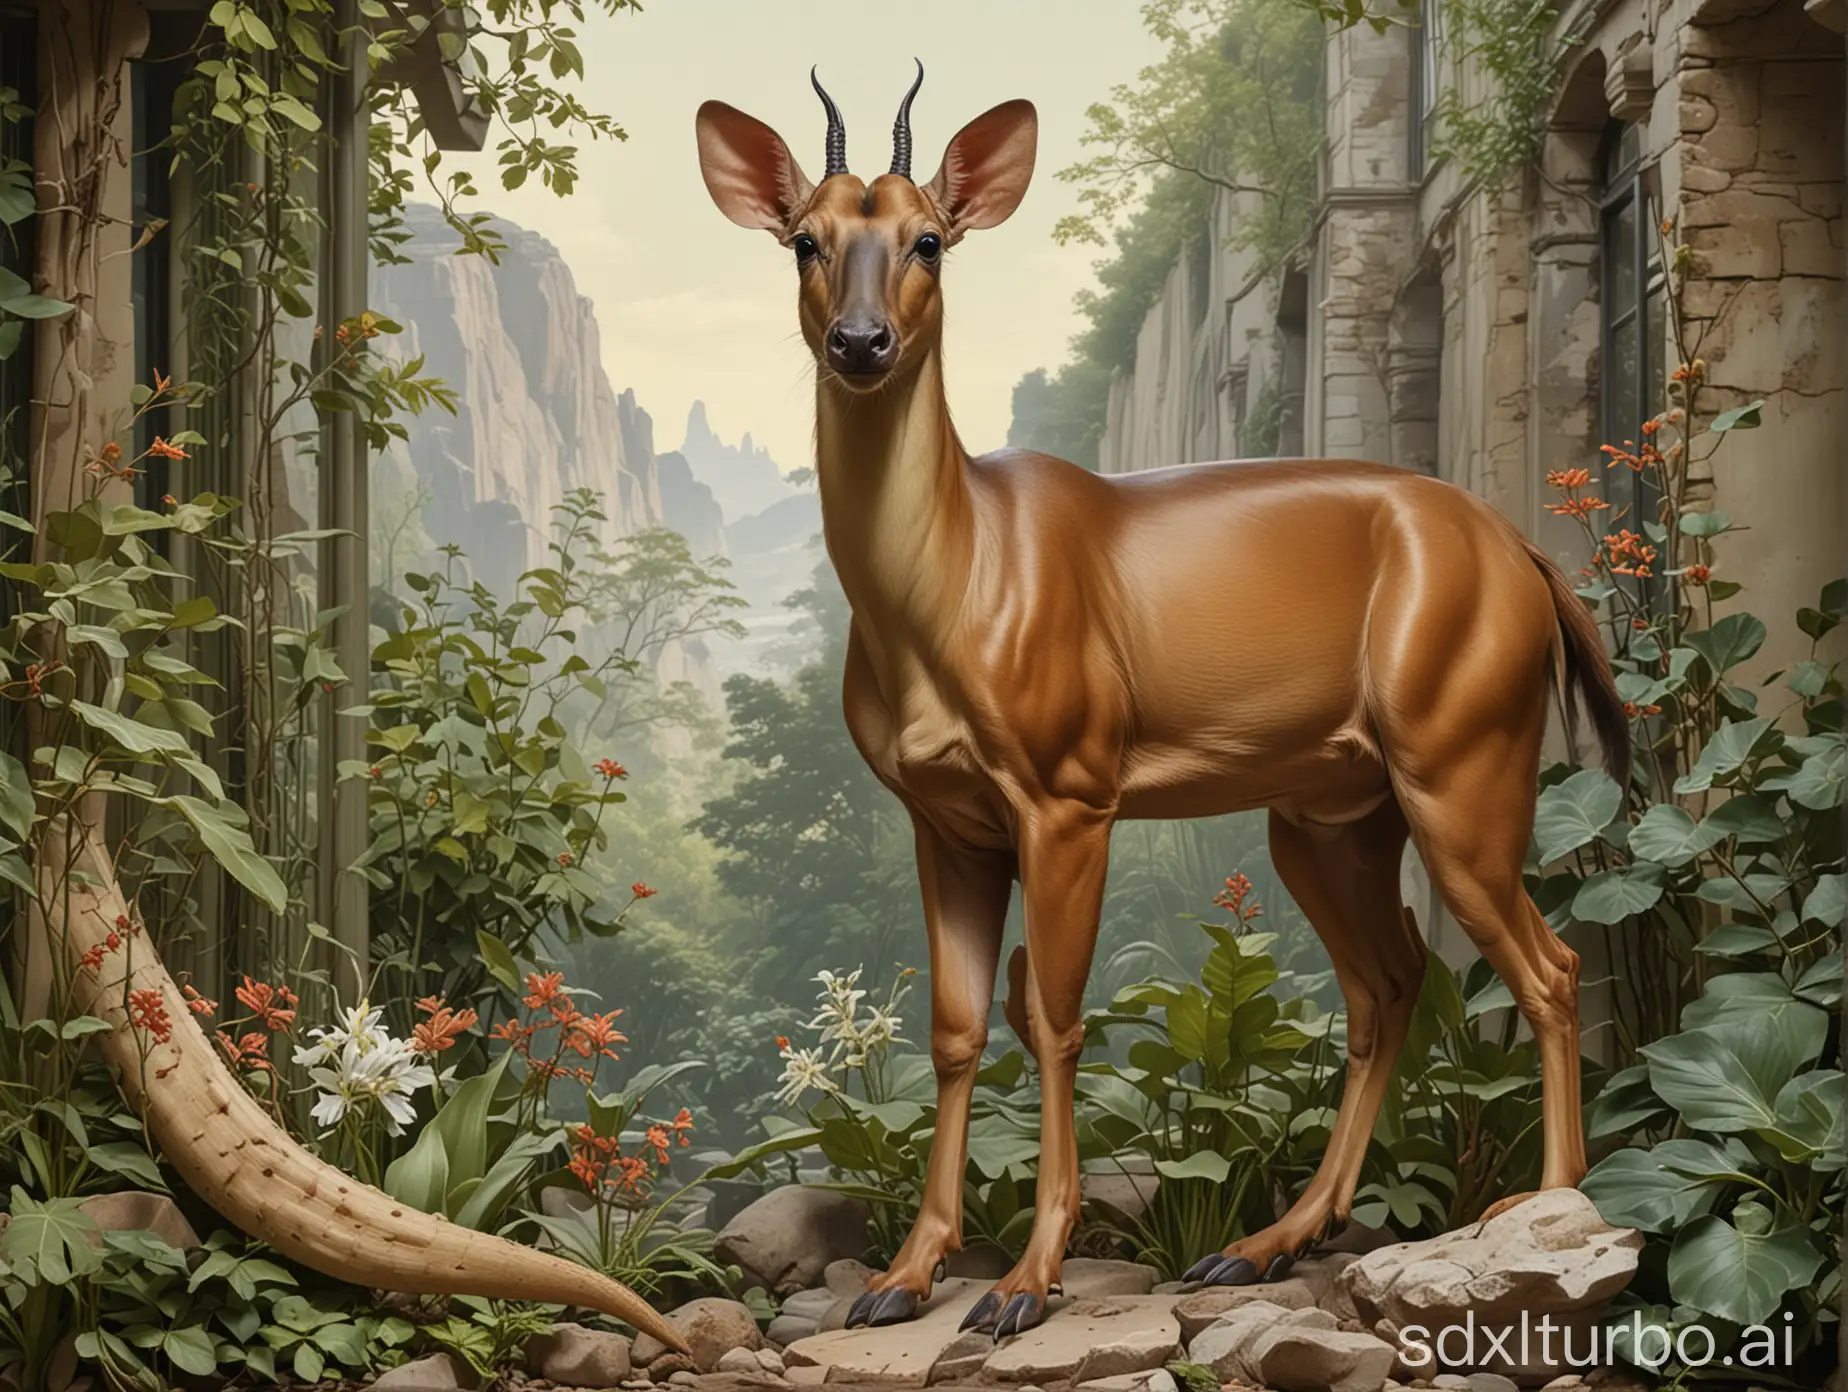 A full body shot of a hybrid creature: anatomy of a muntjac with body skin of a lizard, with a background of a rocky glasshouse garden, in the style of painting by Leyendecker.